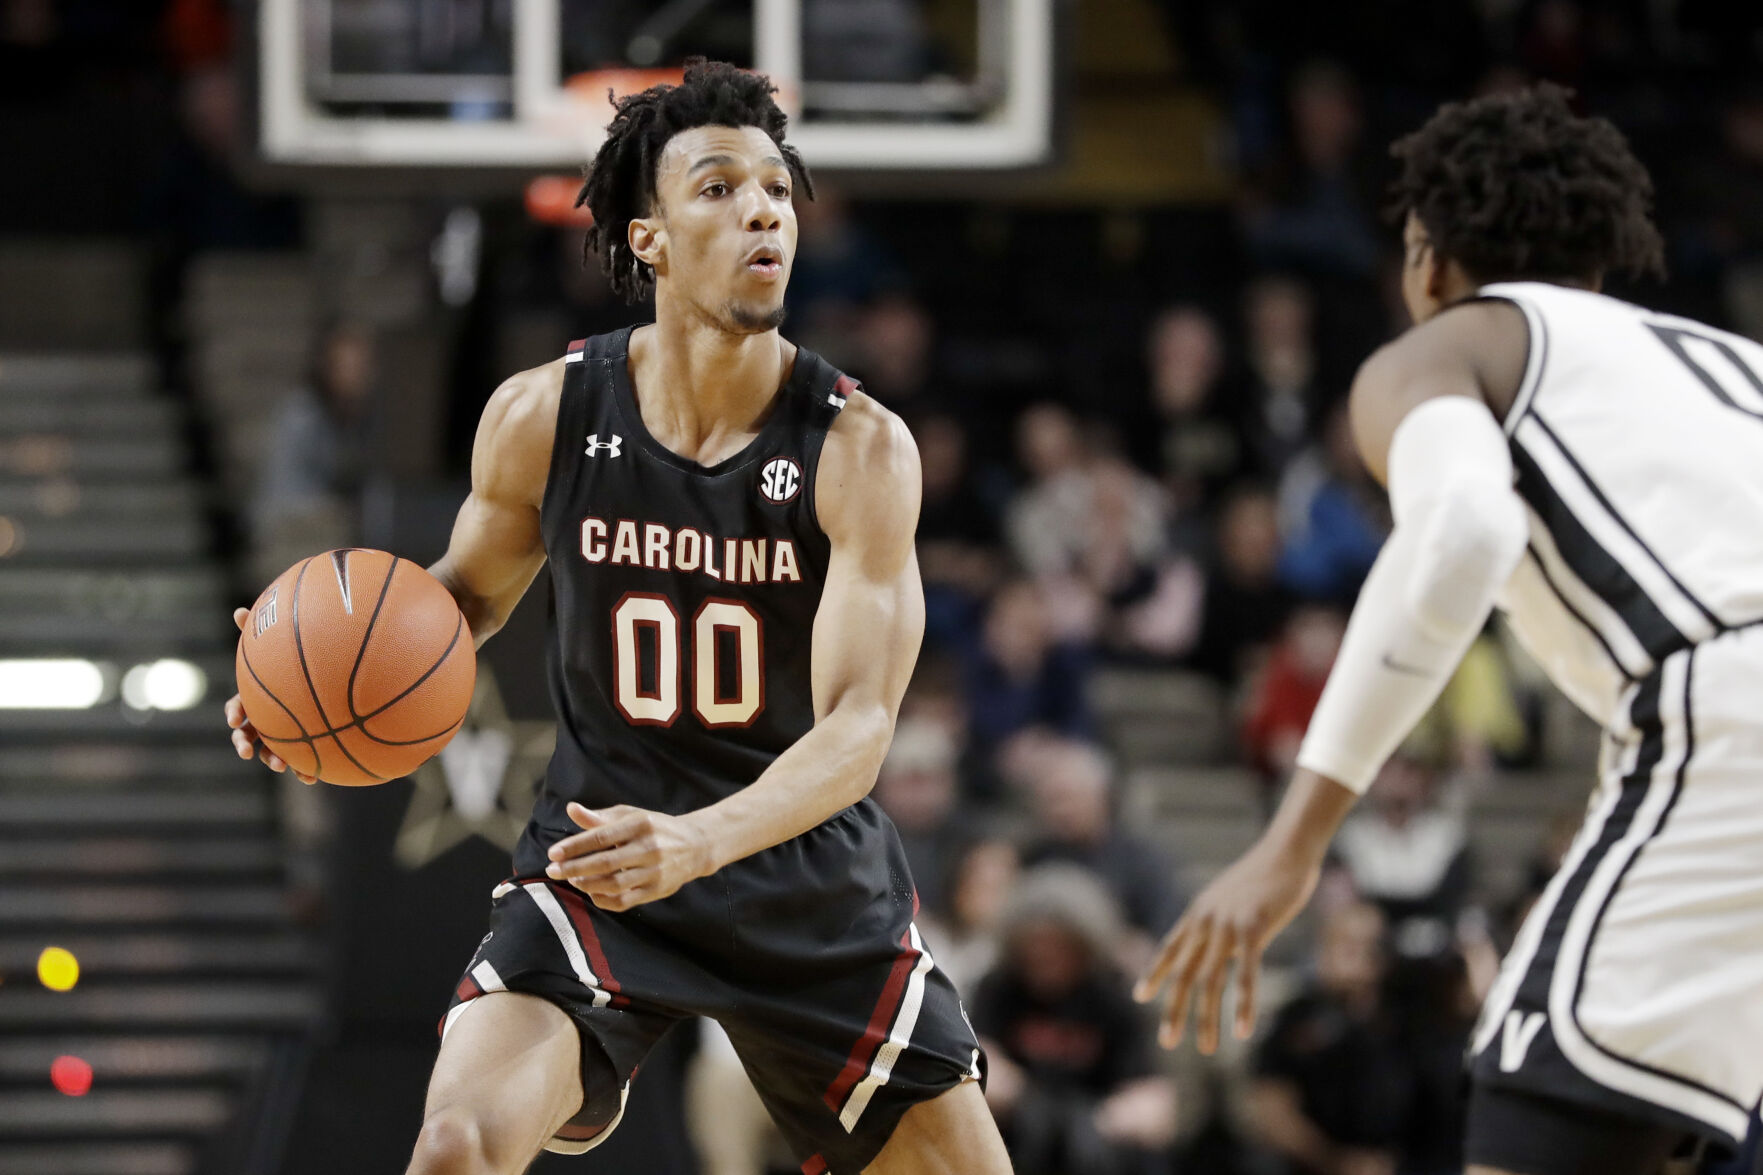 SEC Tournament could be last call for Gamecocks star